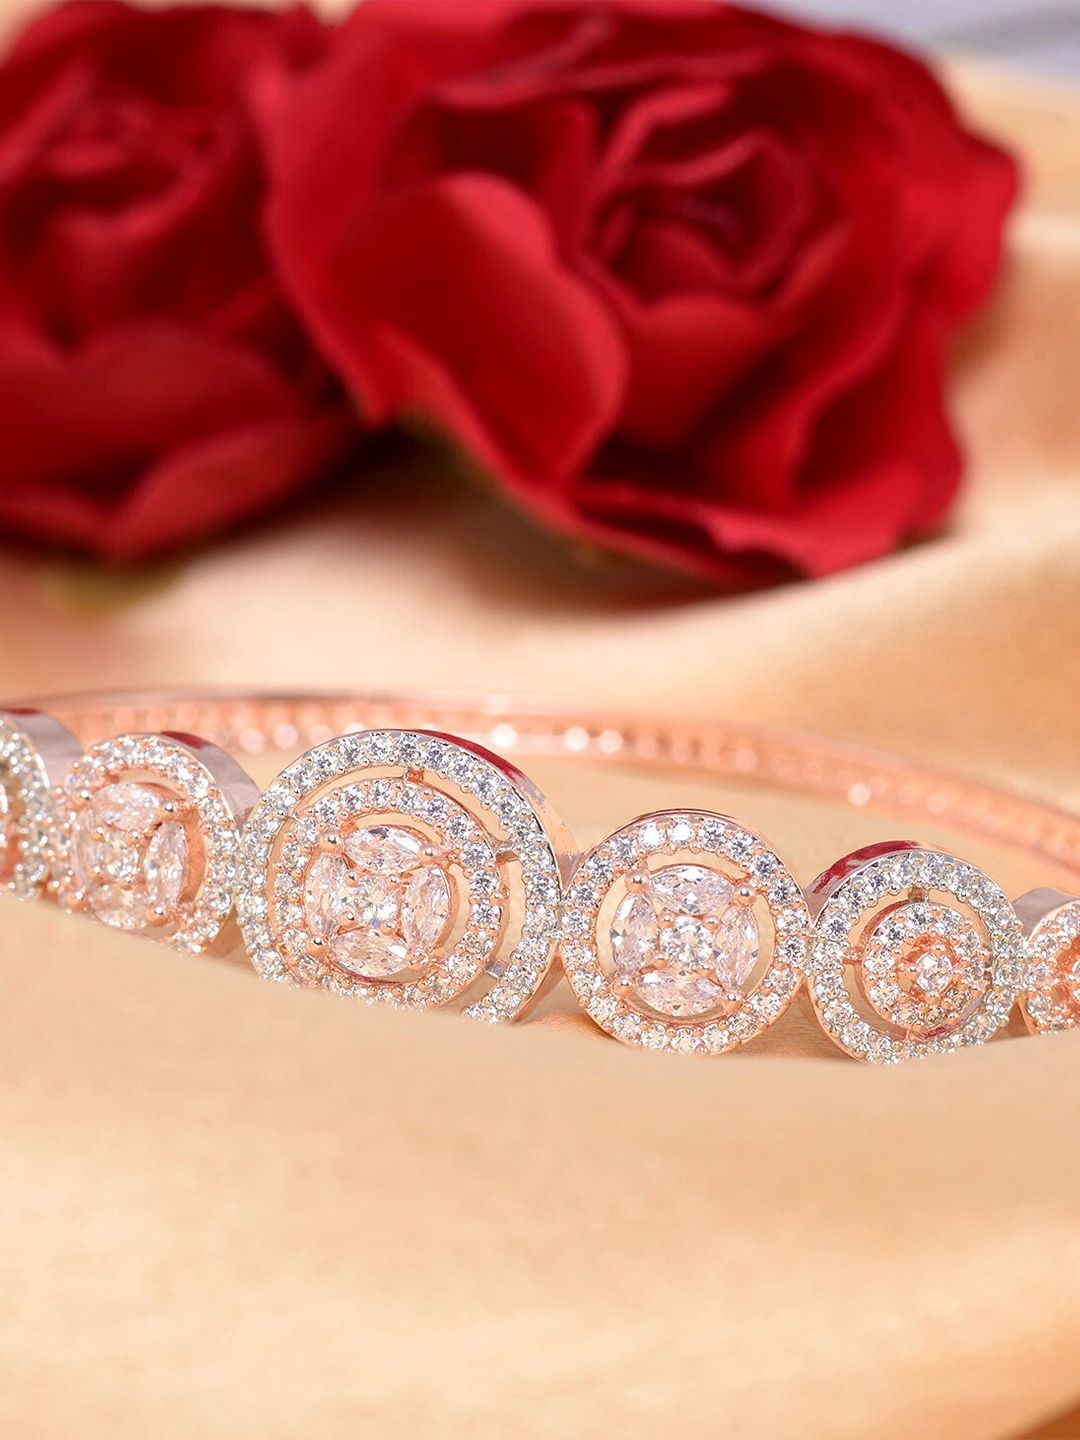 Saraf RS Jewellery Rose Gold-Plated Handcrafted Bangle-Style Bracelet Price in India